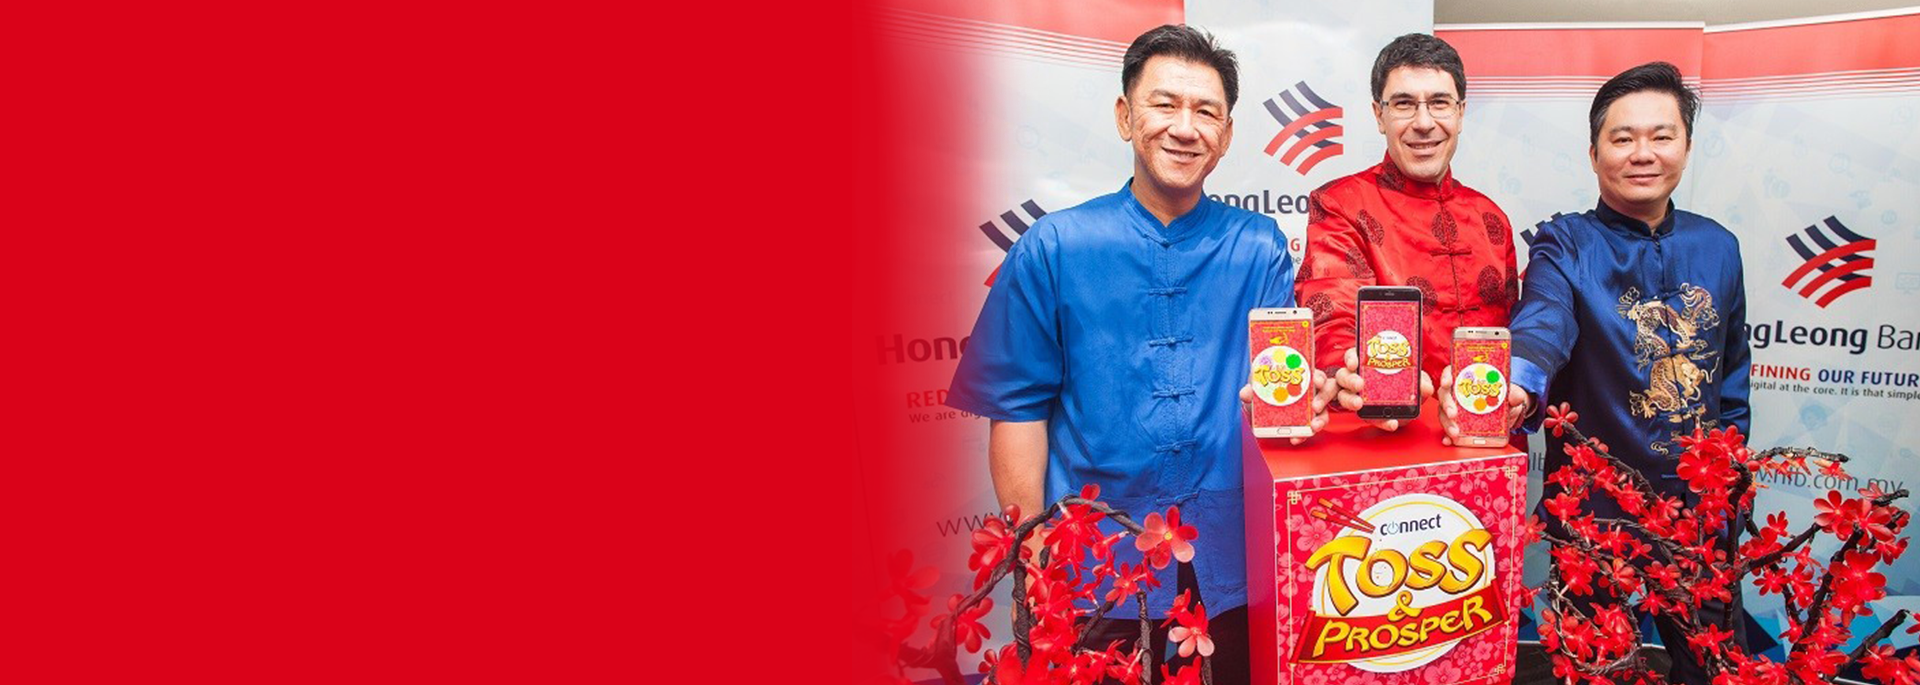 win cash with hong Leong banner